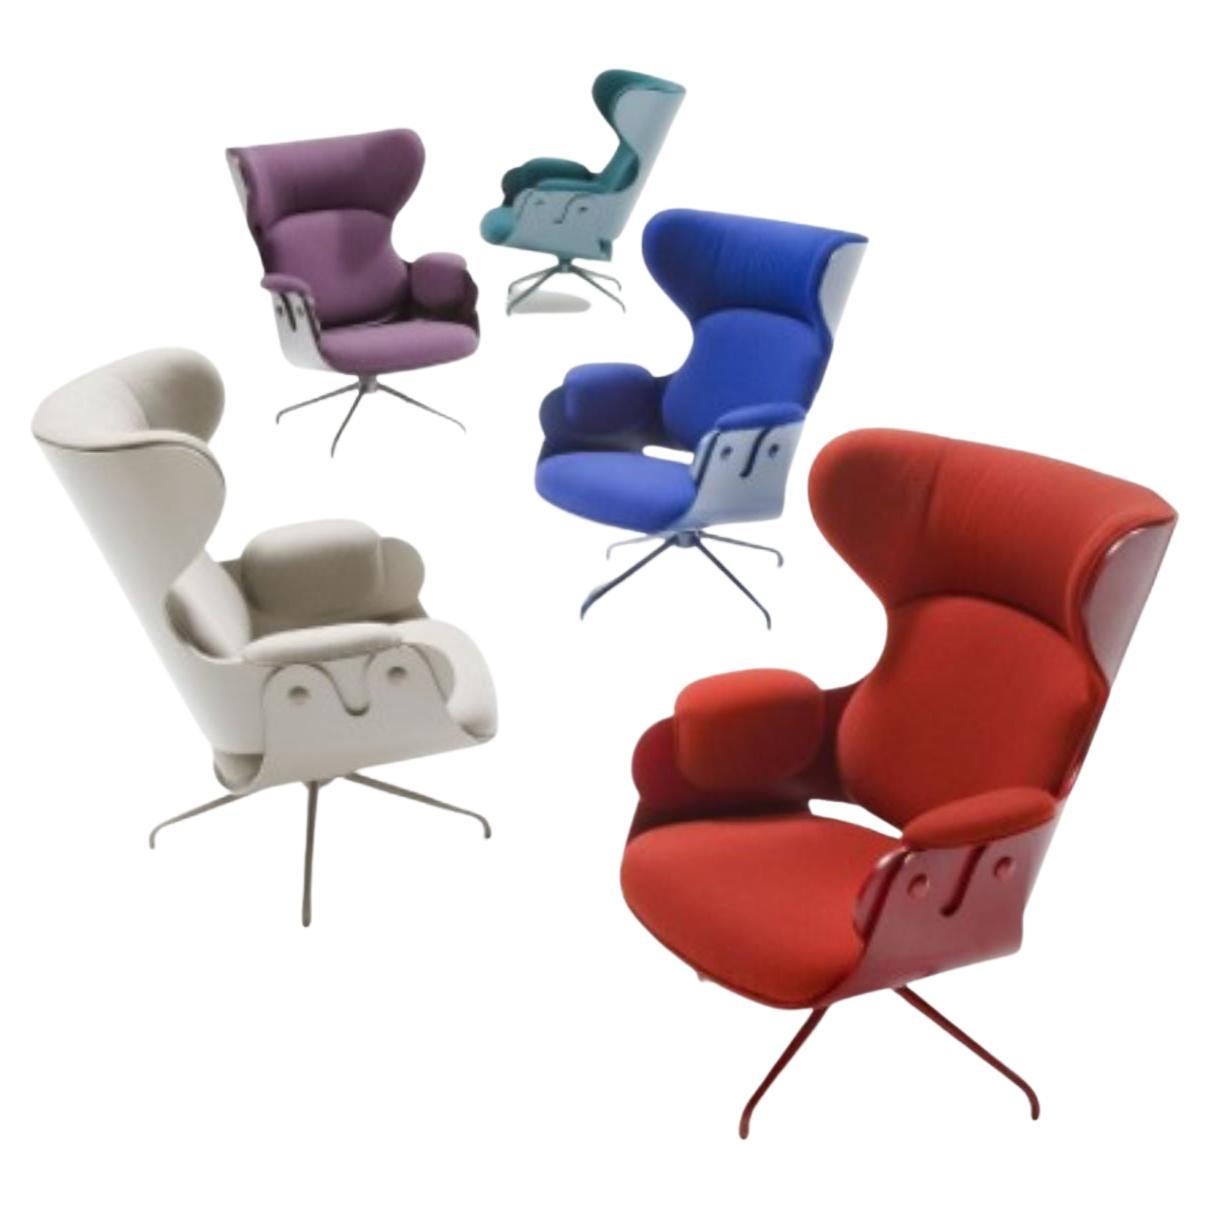 Set of 5 Lounger Armchair by Jaime Hayon